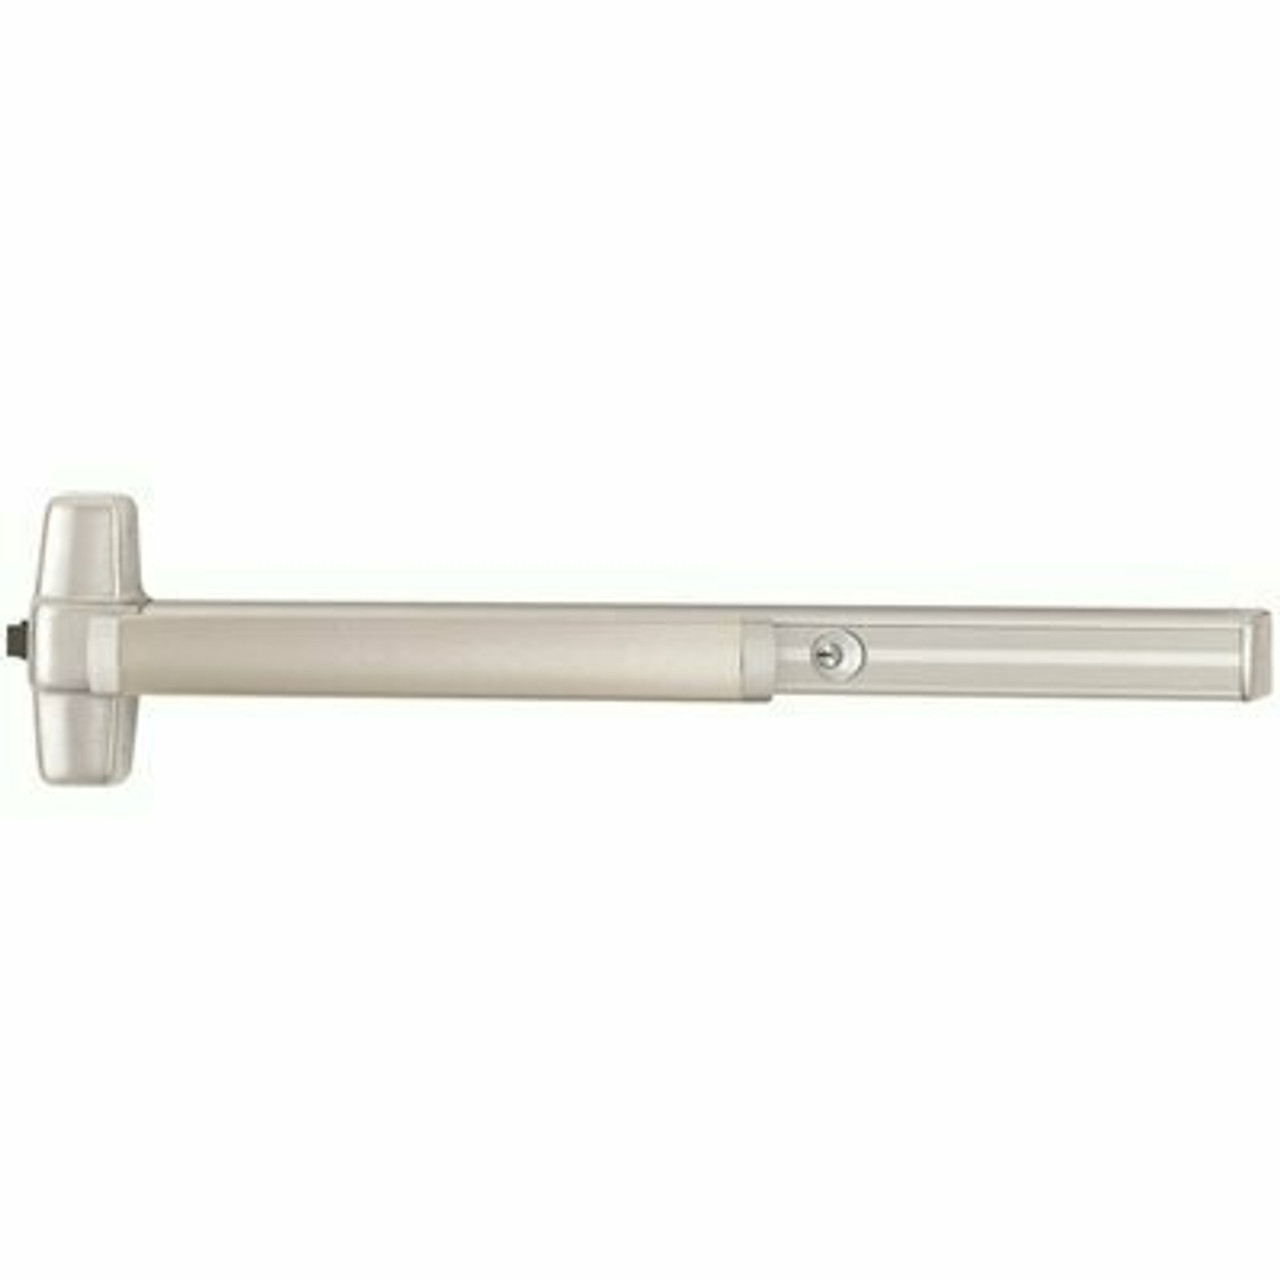 Von Duprin 99 Series Exit Device With Night Latch Optional Pull Trim And Cylinder Dogging